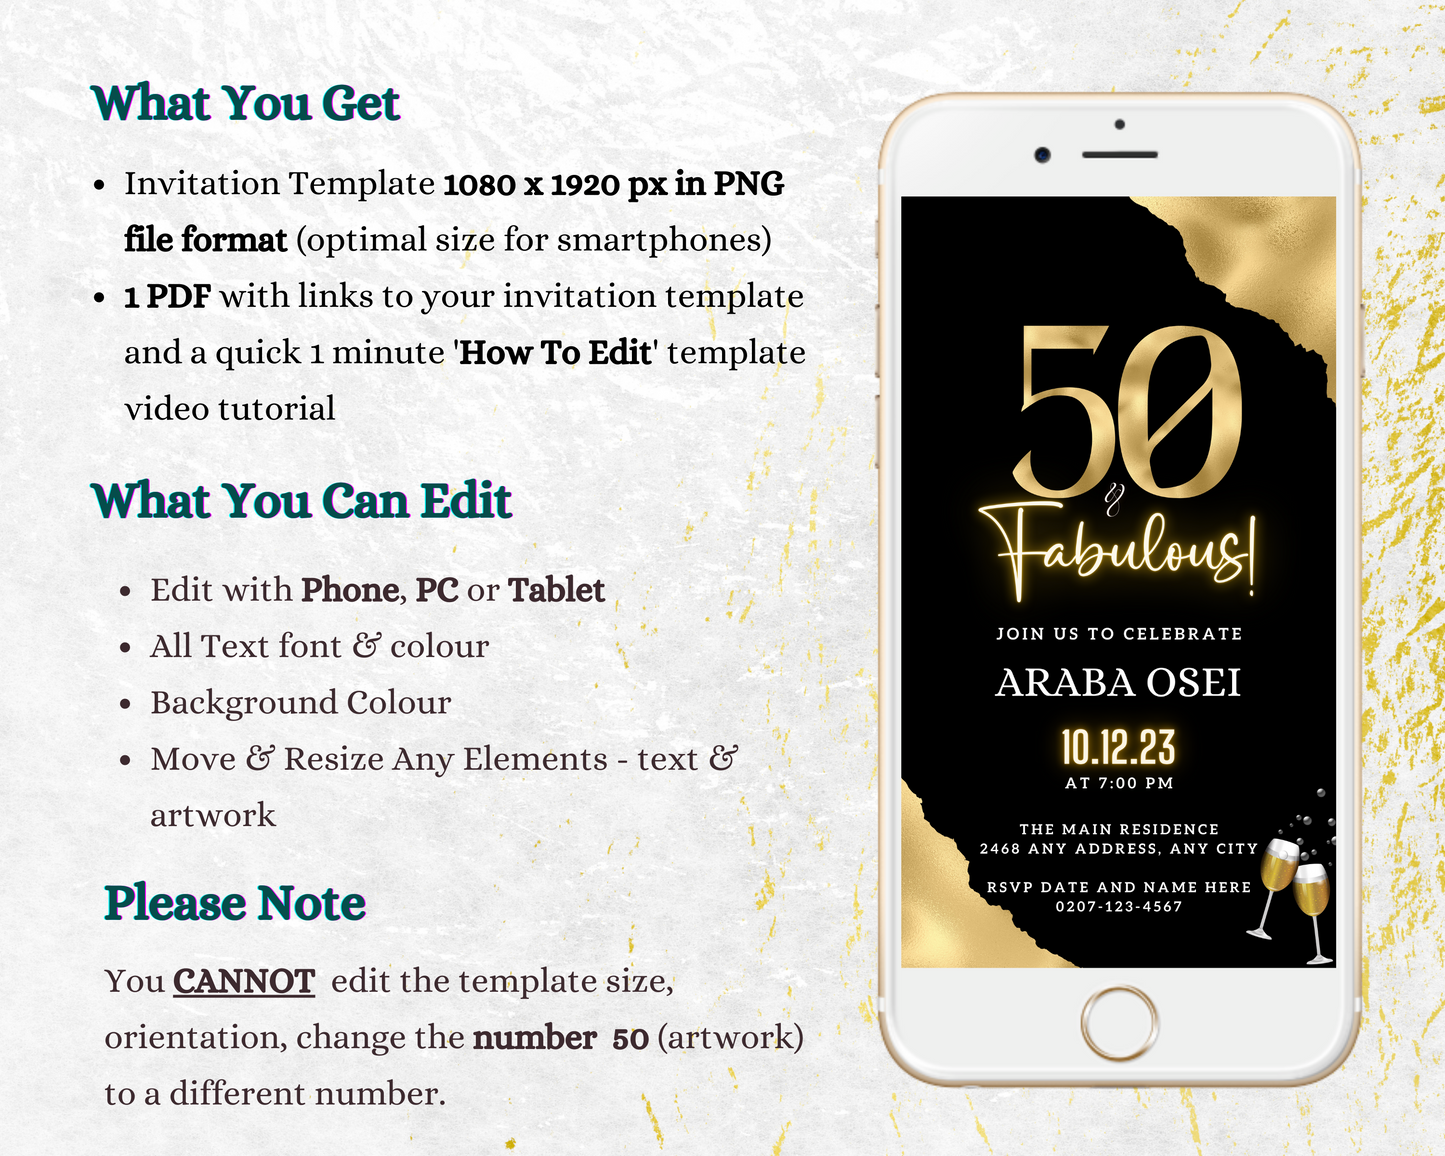 Customizable Gold Neon Black 50 & Fabulous Party Evite displayed on a smartphone, showcasing editable text and design for easy personalizing via Canva.